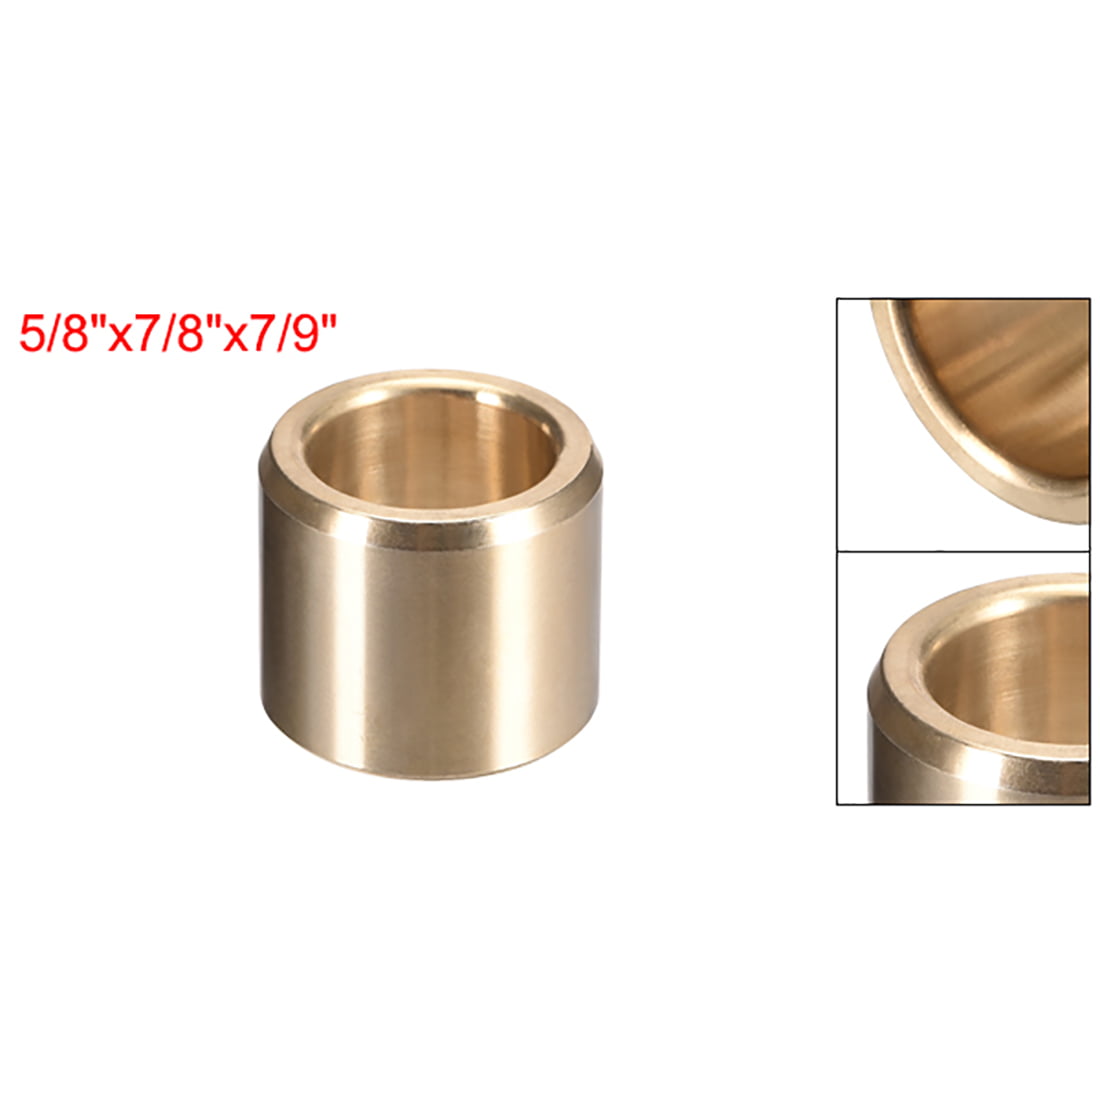 Oil Cup Self Aligning Sleeve Lubricated Bearing Quantity 2: Triangle Mfg Galvanized Steel Shell with Bronze Bushing H10A Bore ID 5/8